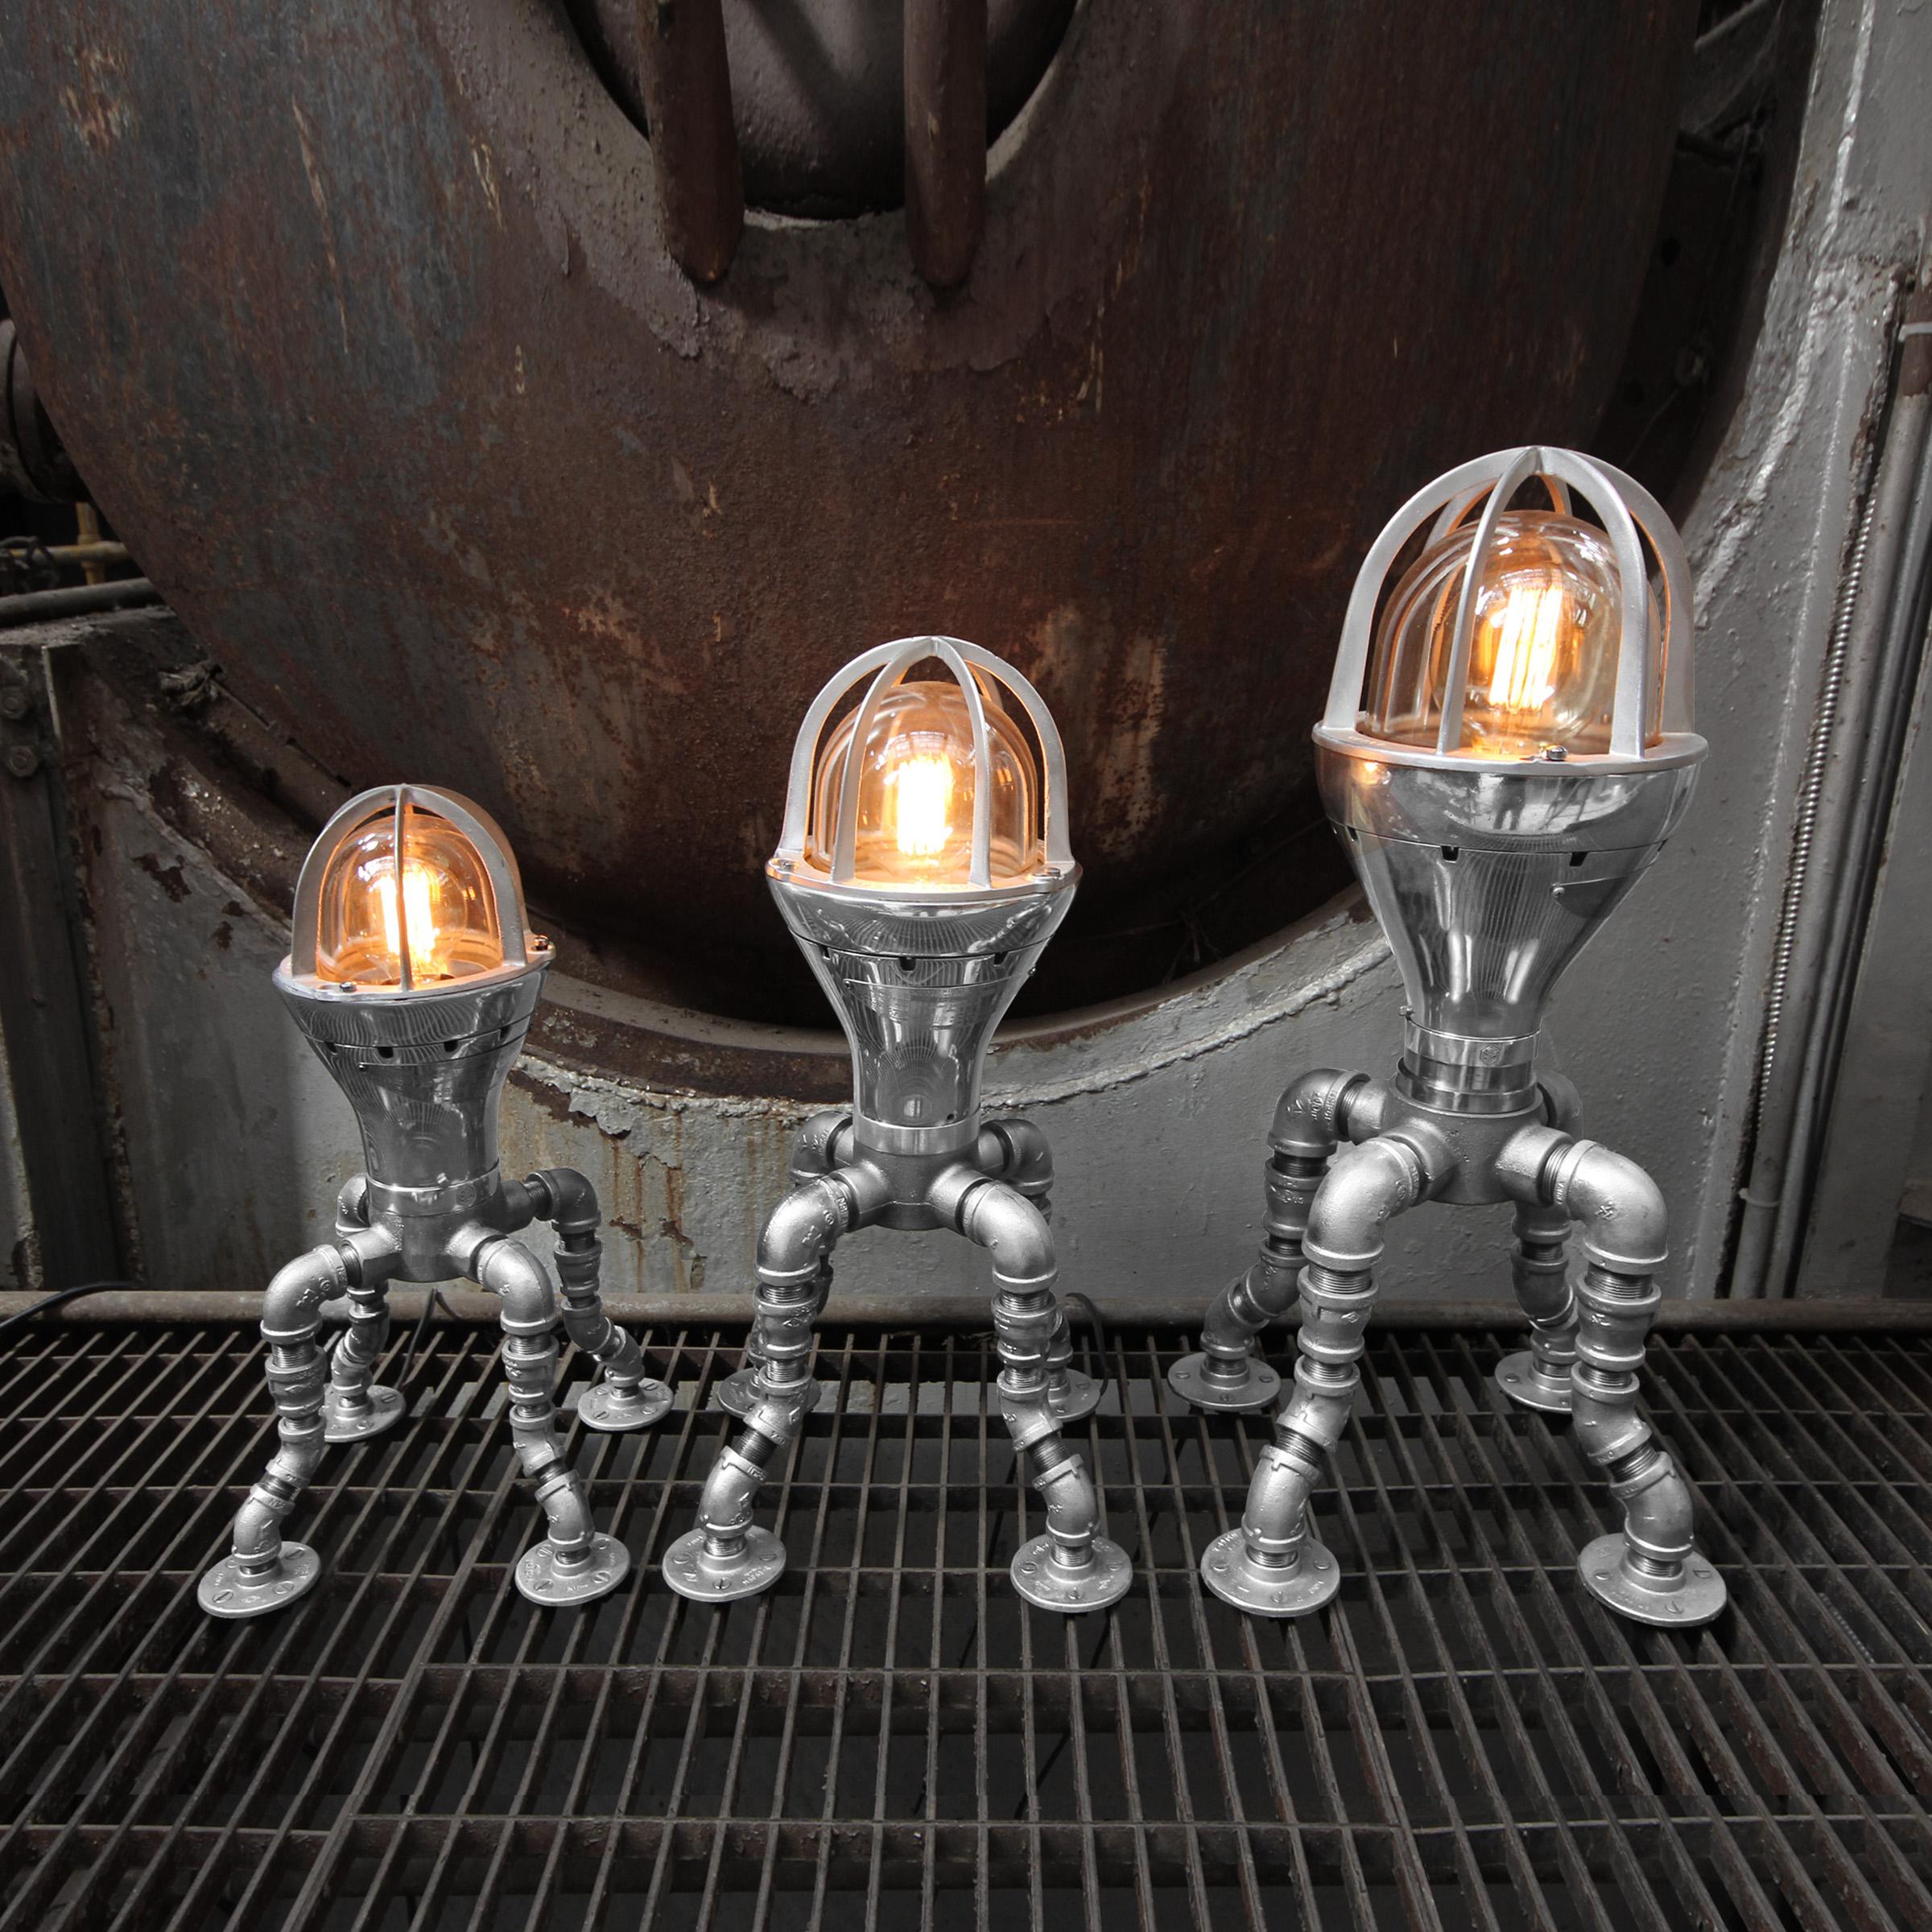 Steel Modern Industrial Lamp Set - Industrial Decor - Crouse Hinds Industrial Light For Sale